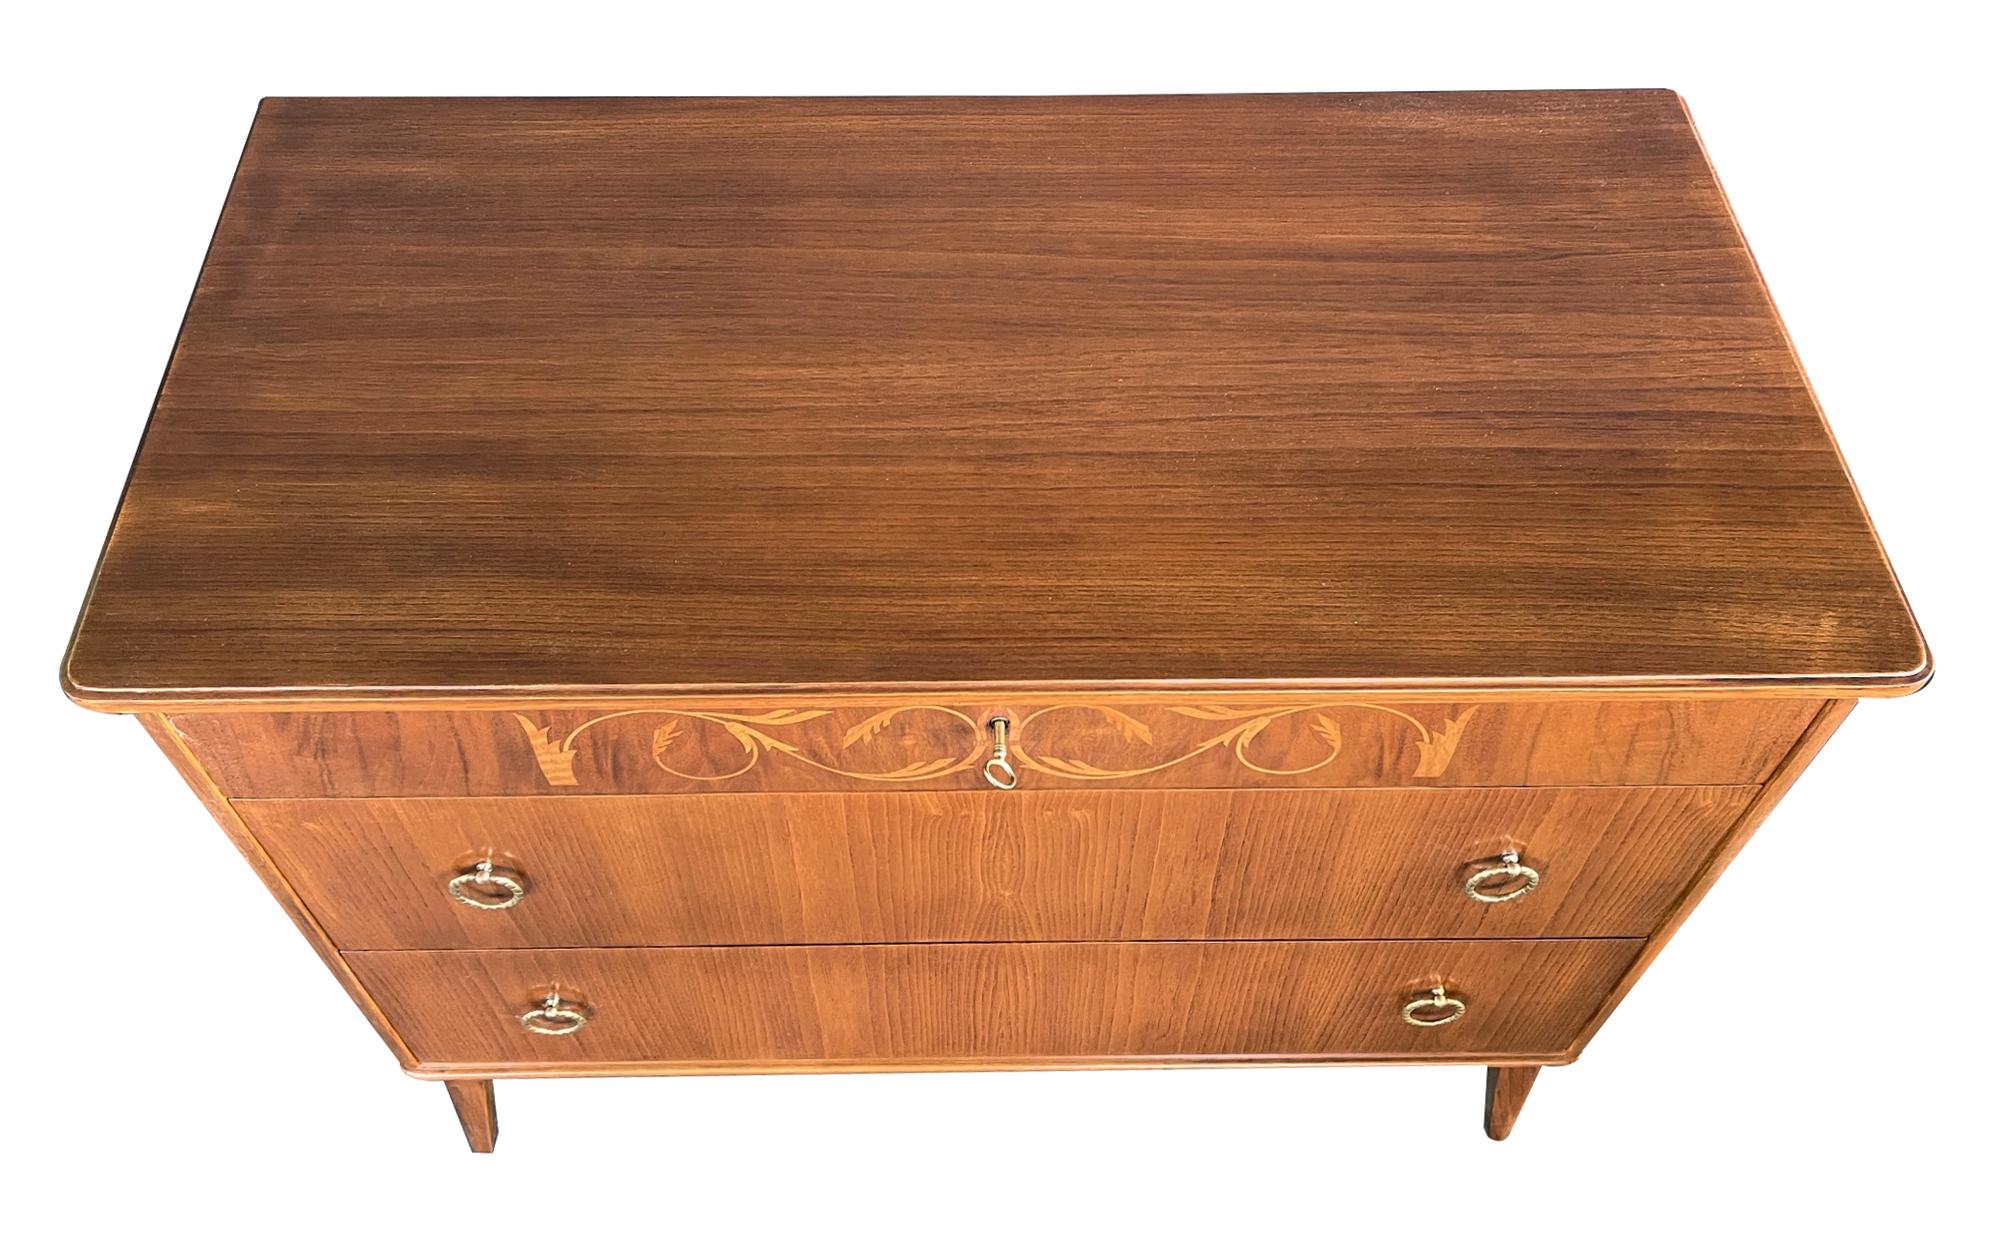 Mid-Century Modern Marquetry Inlaid Birch Chest of Drawers, Possibly Swedish In Excellent Condition For Sale In San Francisco, CA